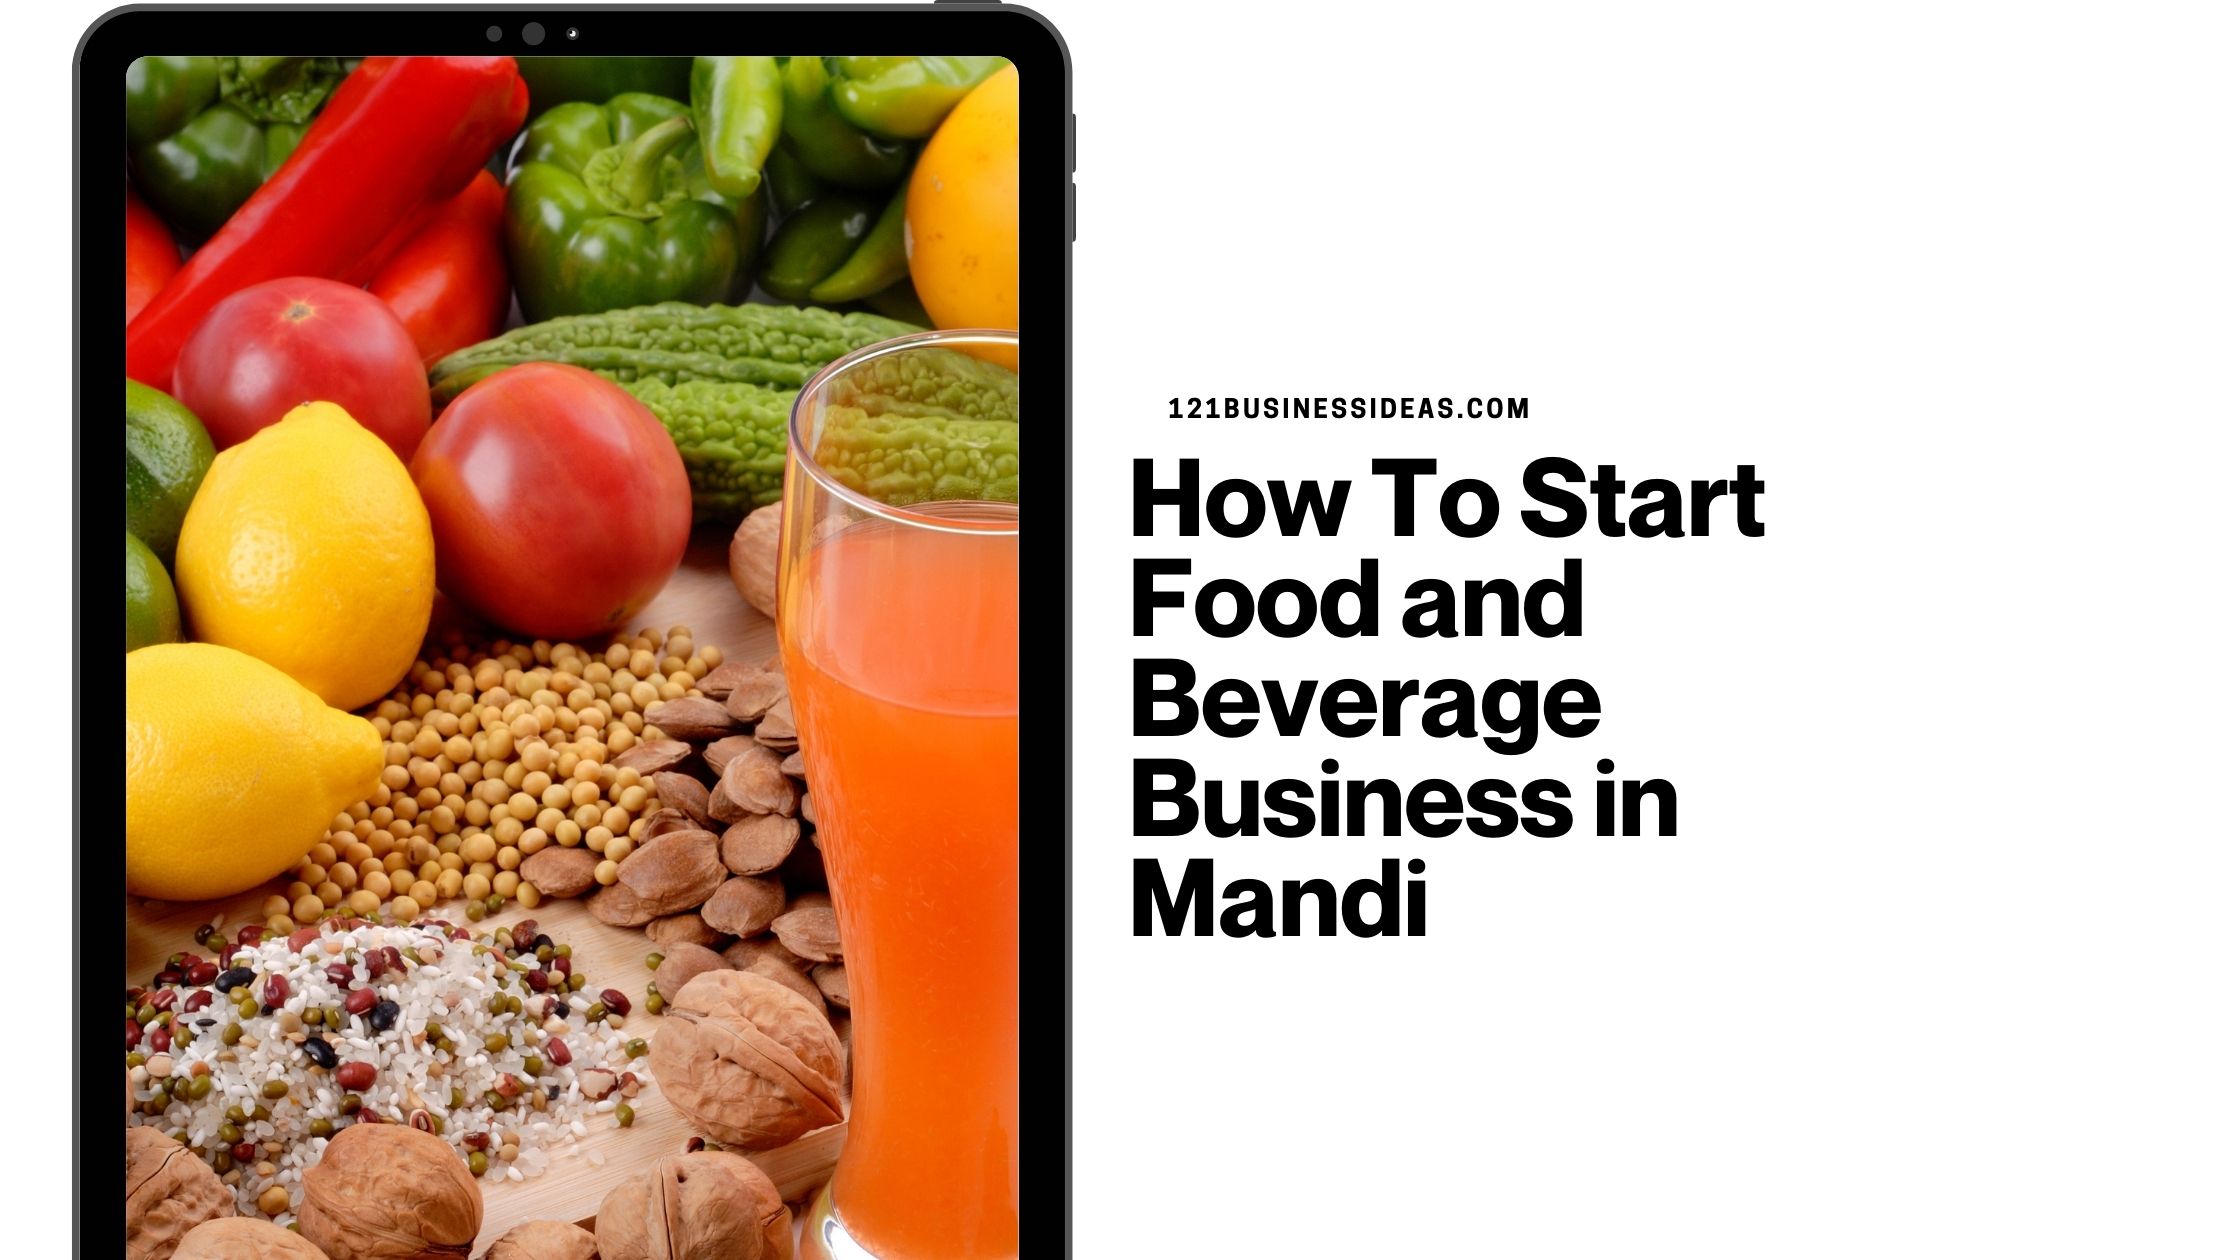 How To Start Food and Beverage Business in Mandi (5)